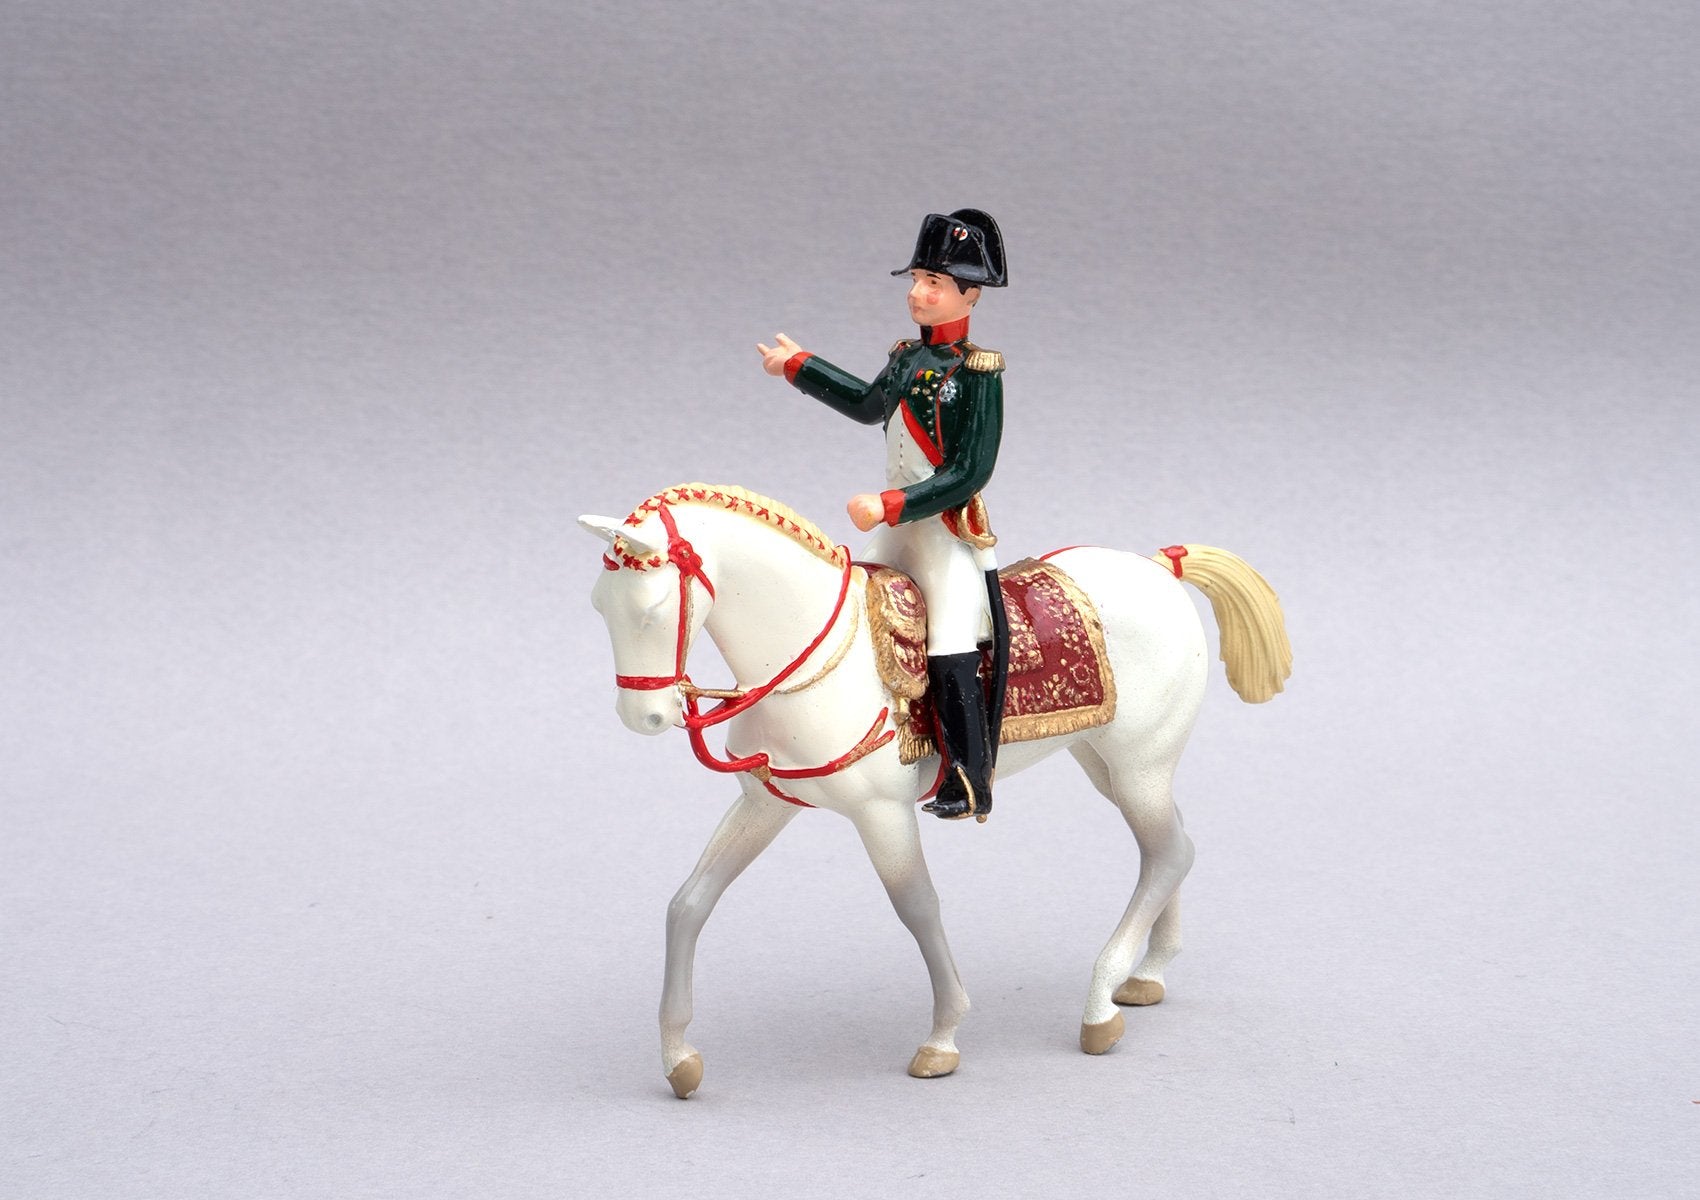 Set 93 Napoleon, 1st Emperor of France | French | Napoleonic Wars | Bicorne hat and chasseur a cheval uniform. Riding his famous warhorse, Marengo | Waterloo | © Imperial Productions | Sculpt by David Cowe